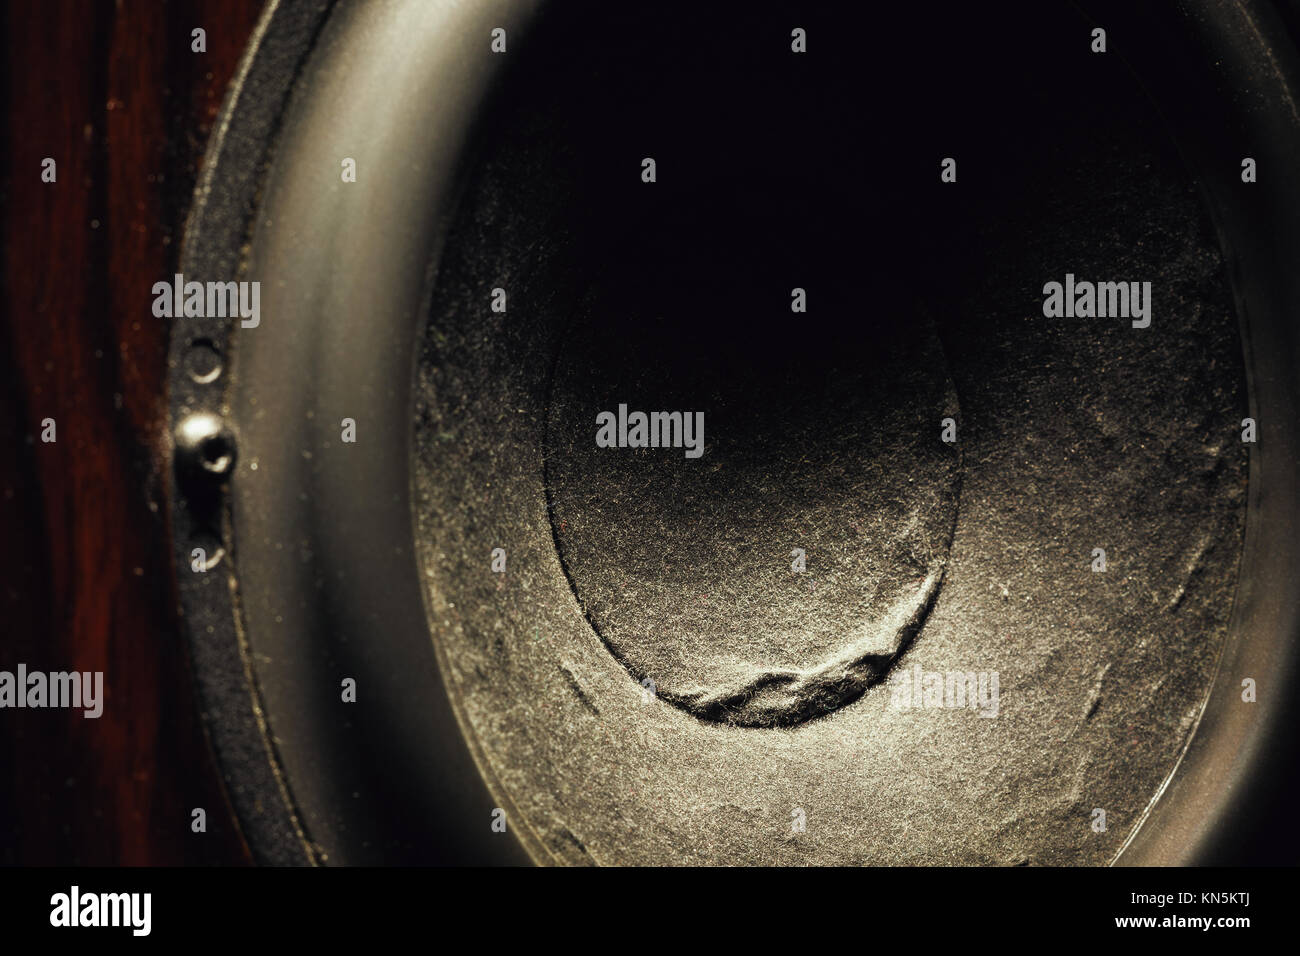 Details of speaker woofer cone, closeup view. Stock Photo